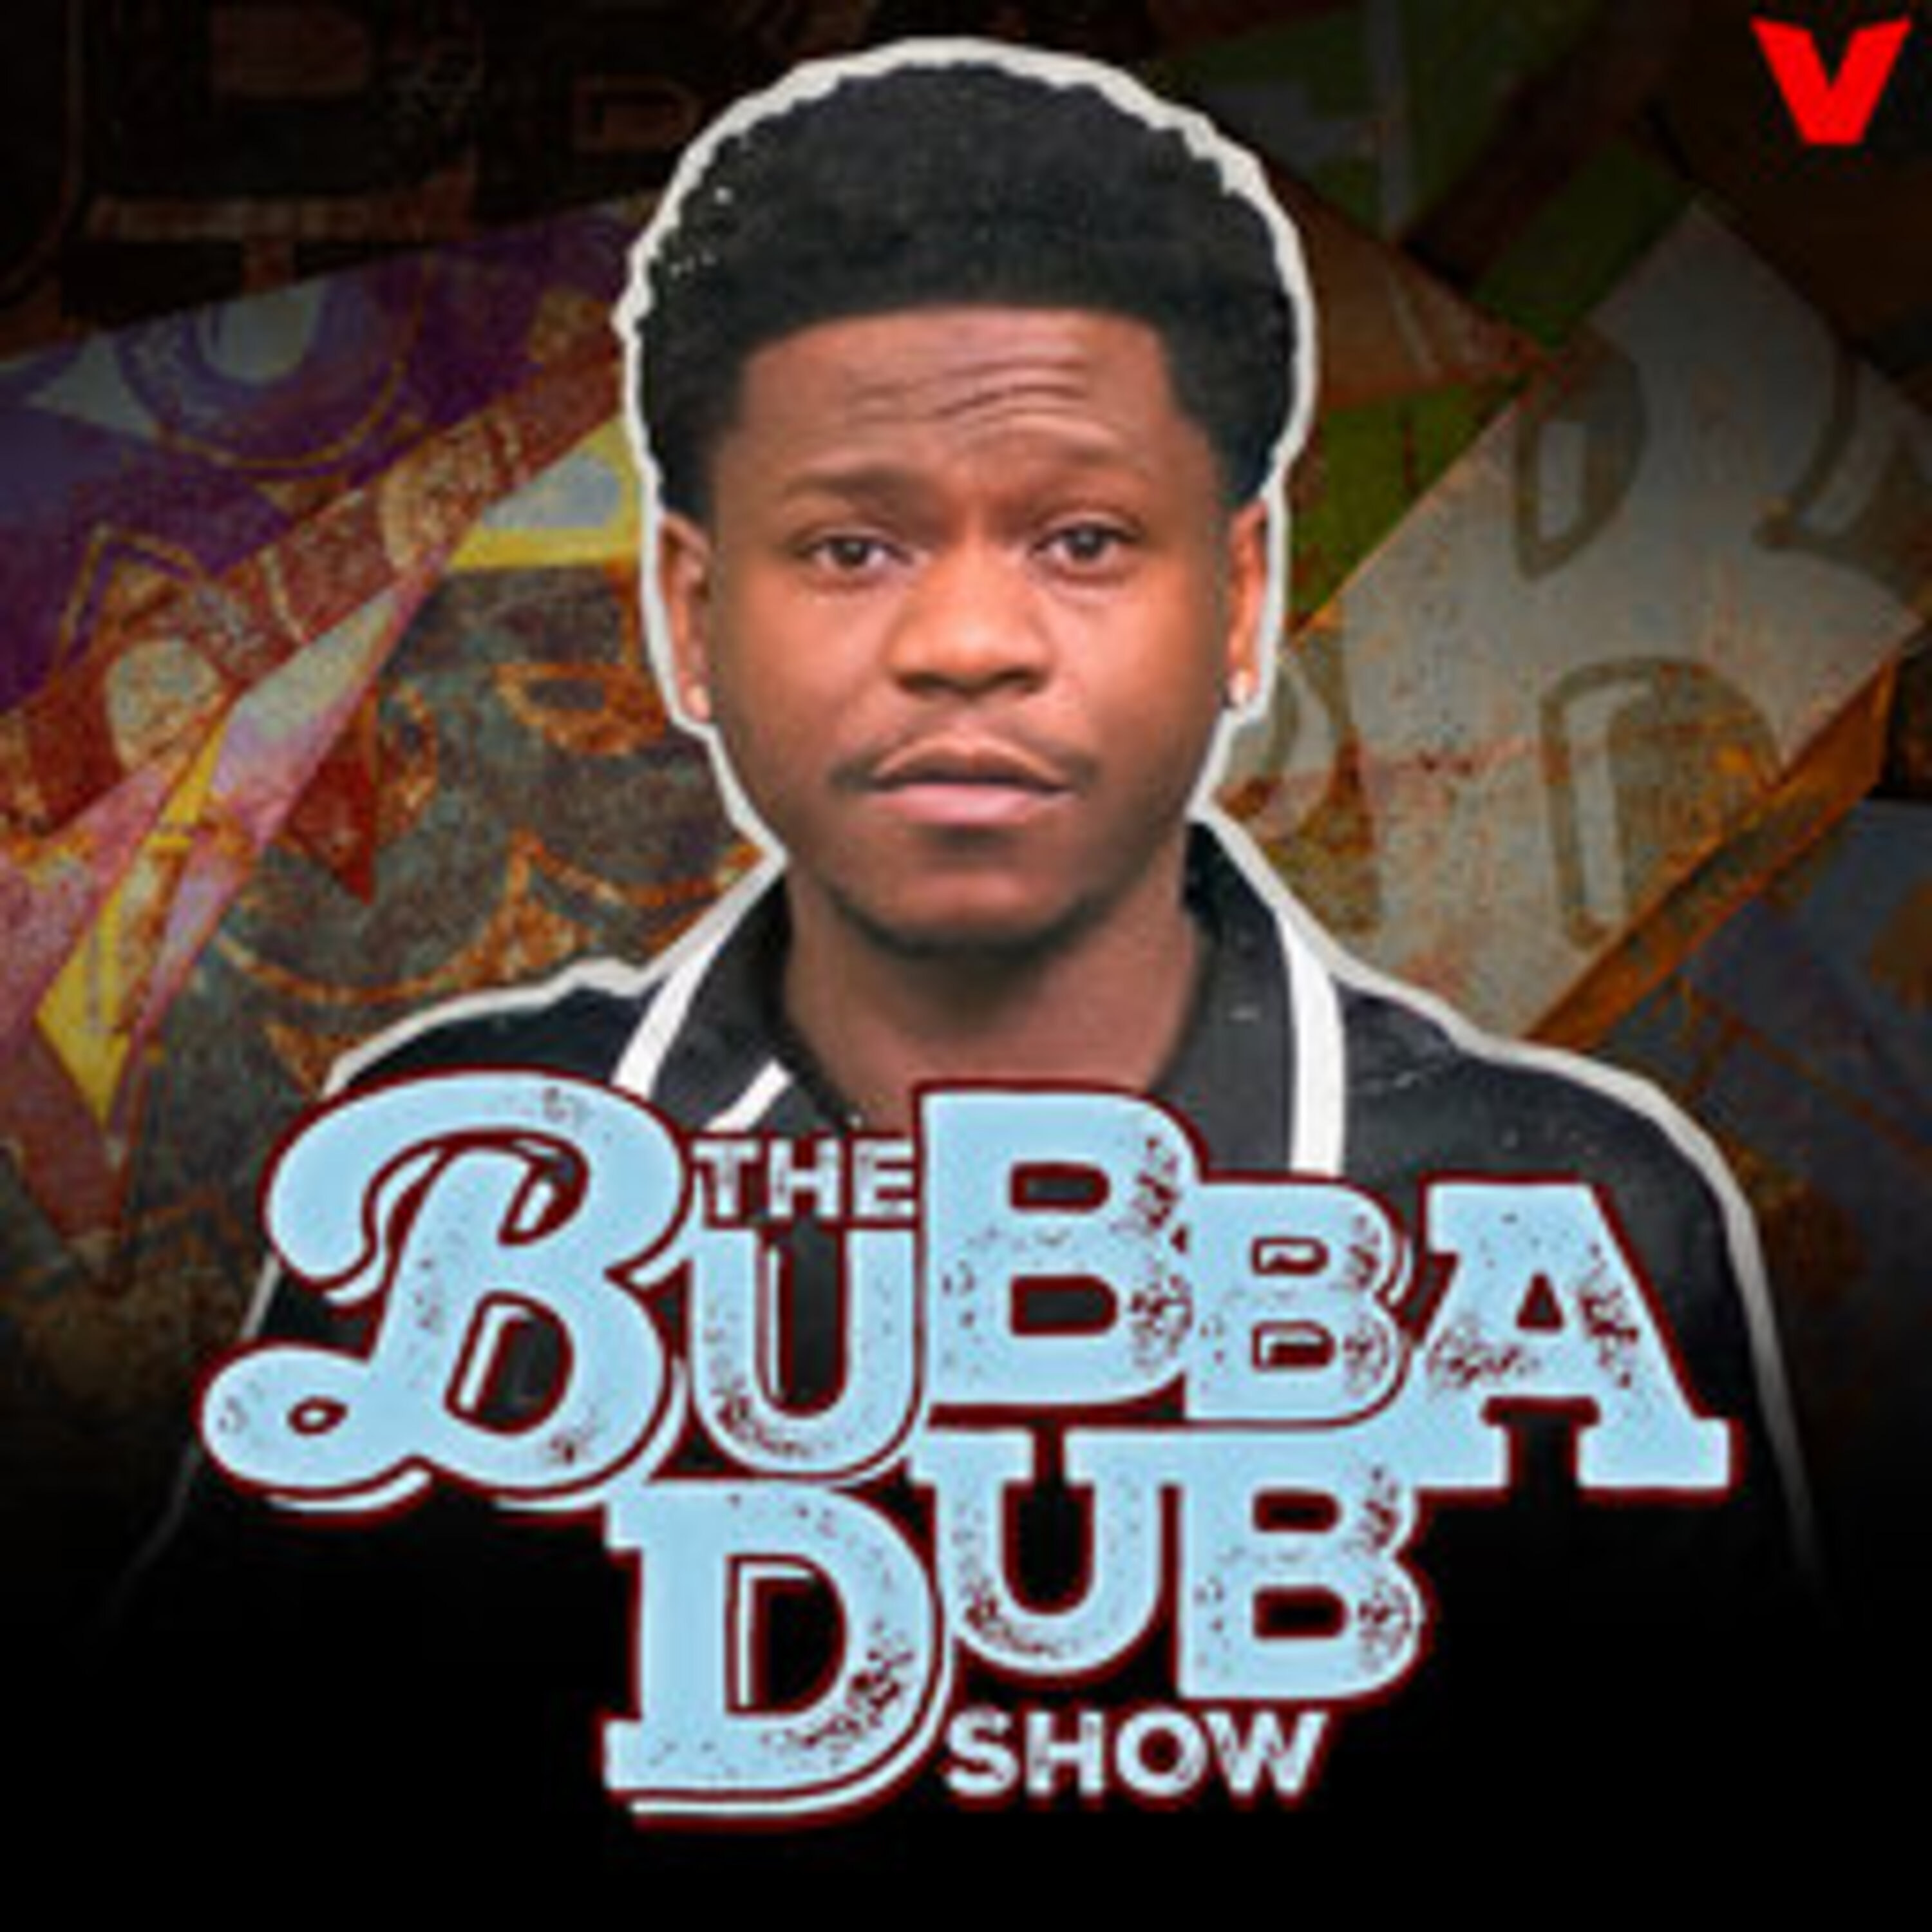 The Bubba Dub Show - Lakers Advance, Eastern Conference Play-In Preview, Jontay Porter Banned For Life, Trash of the Day